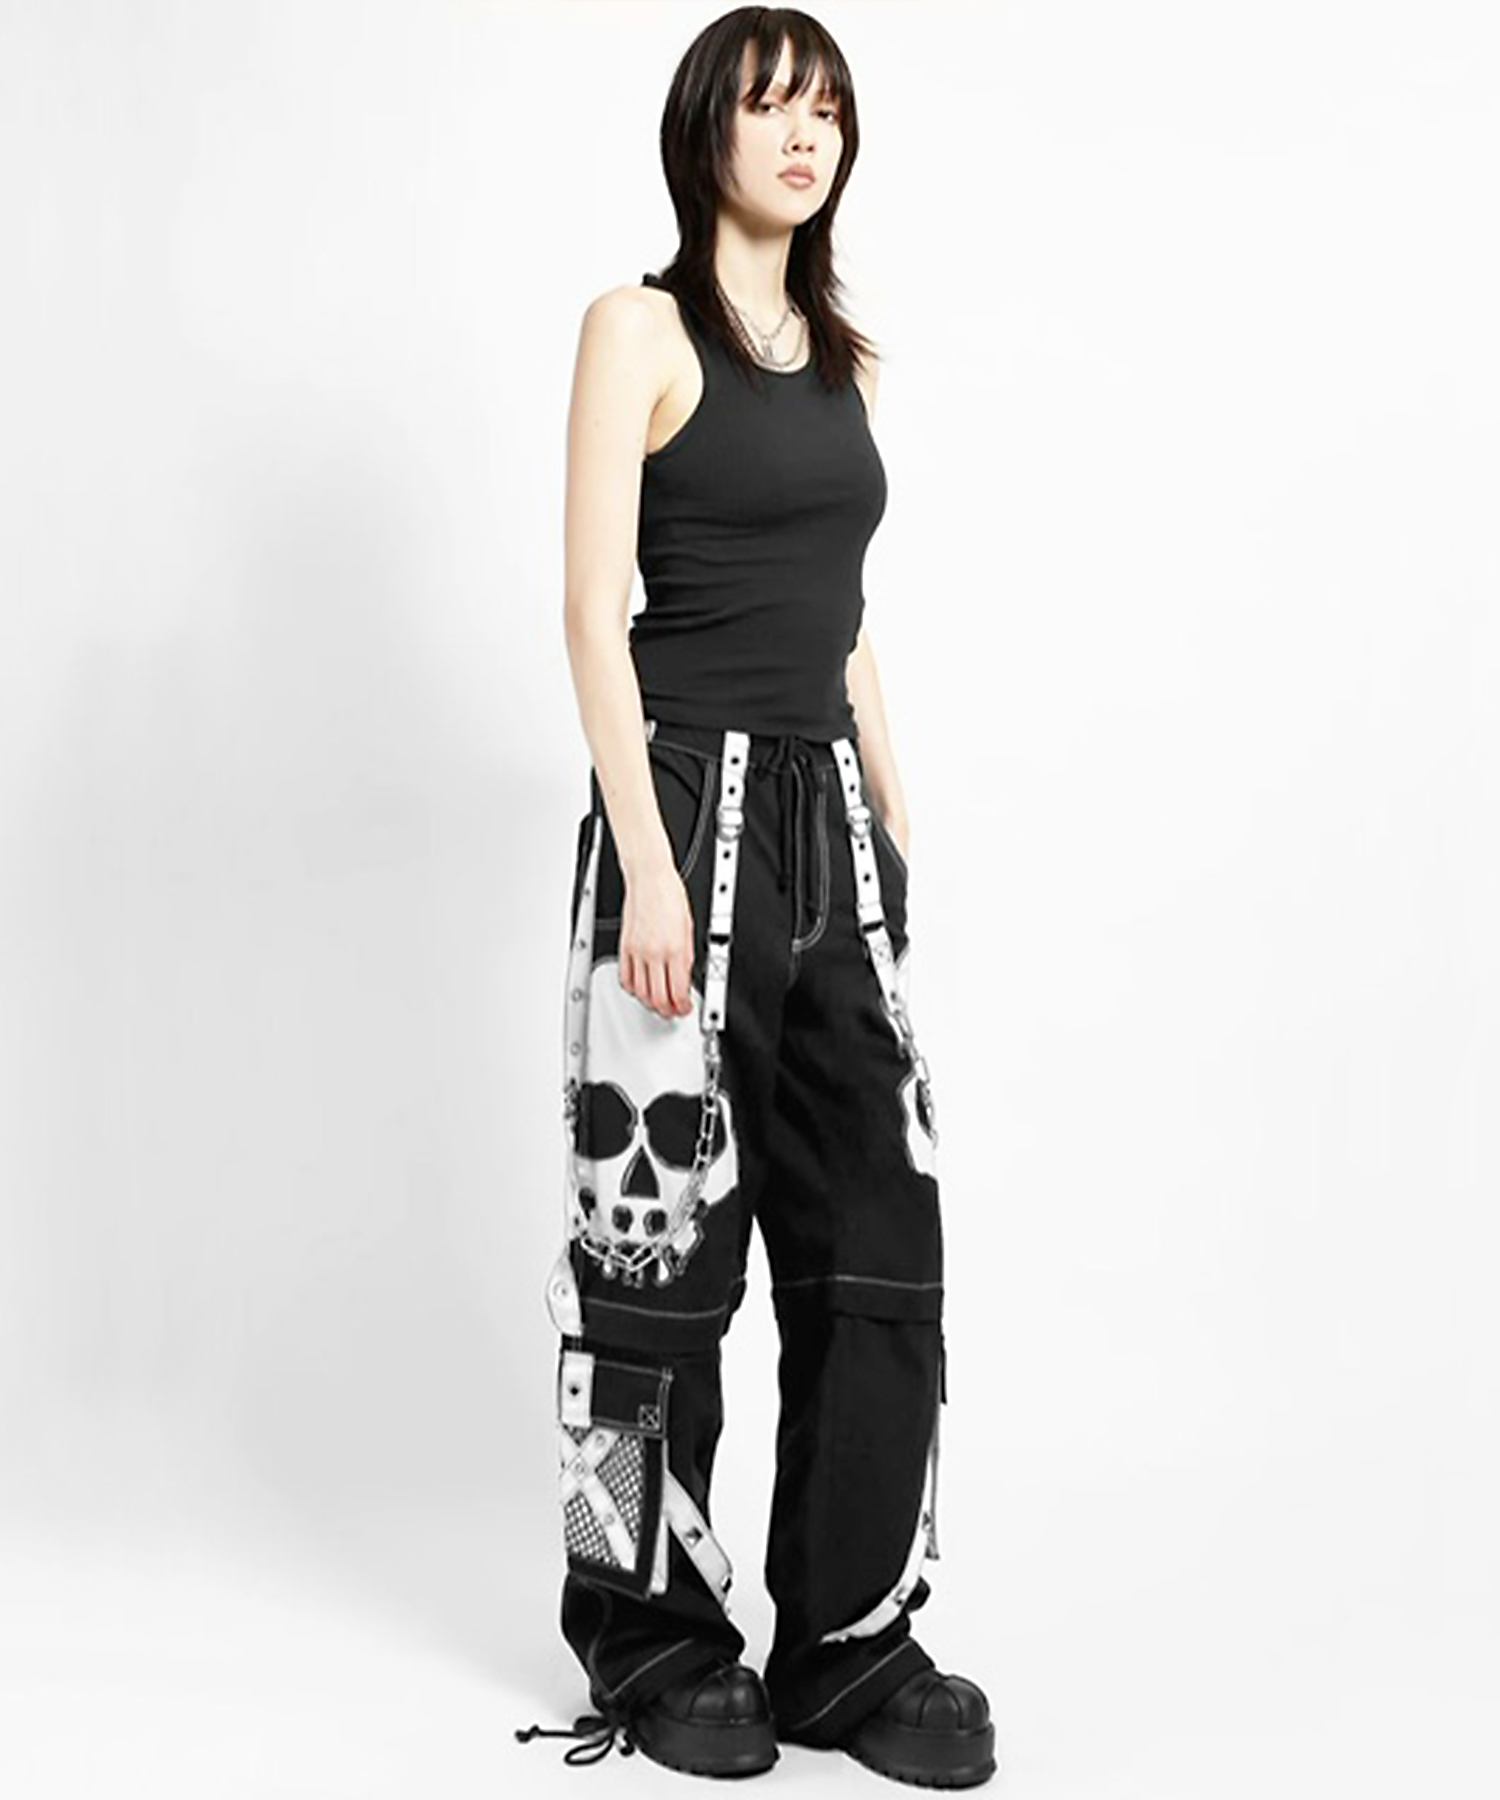 TRIPP nyc SCARE PANT